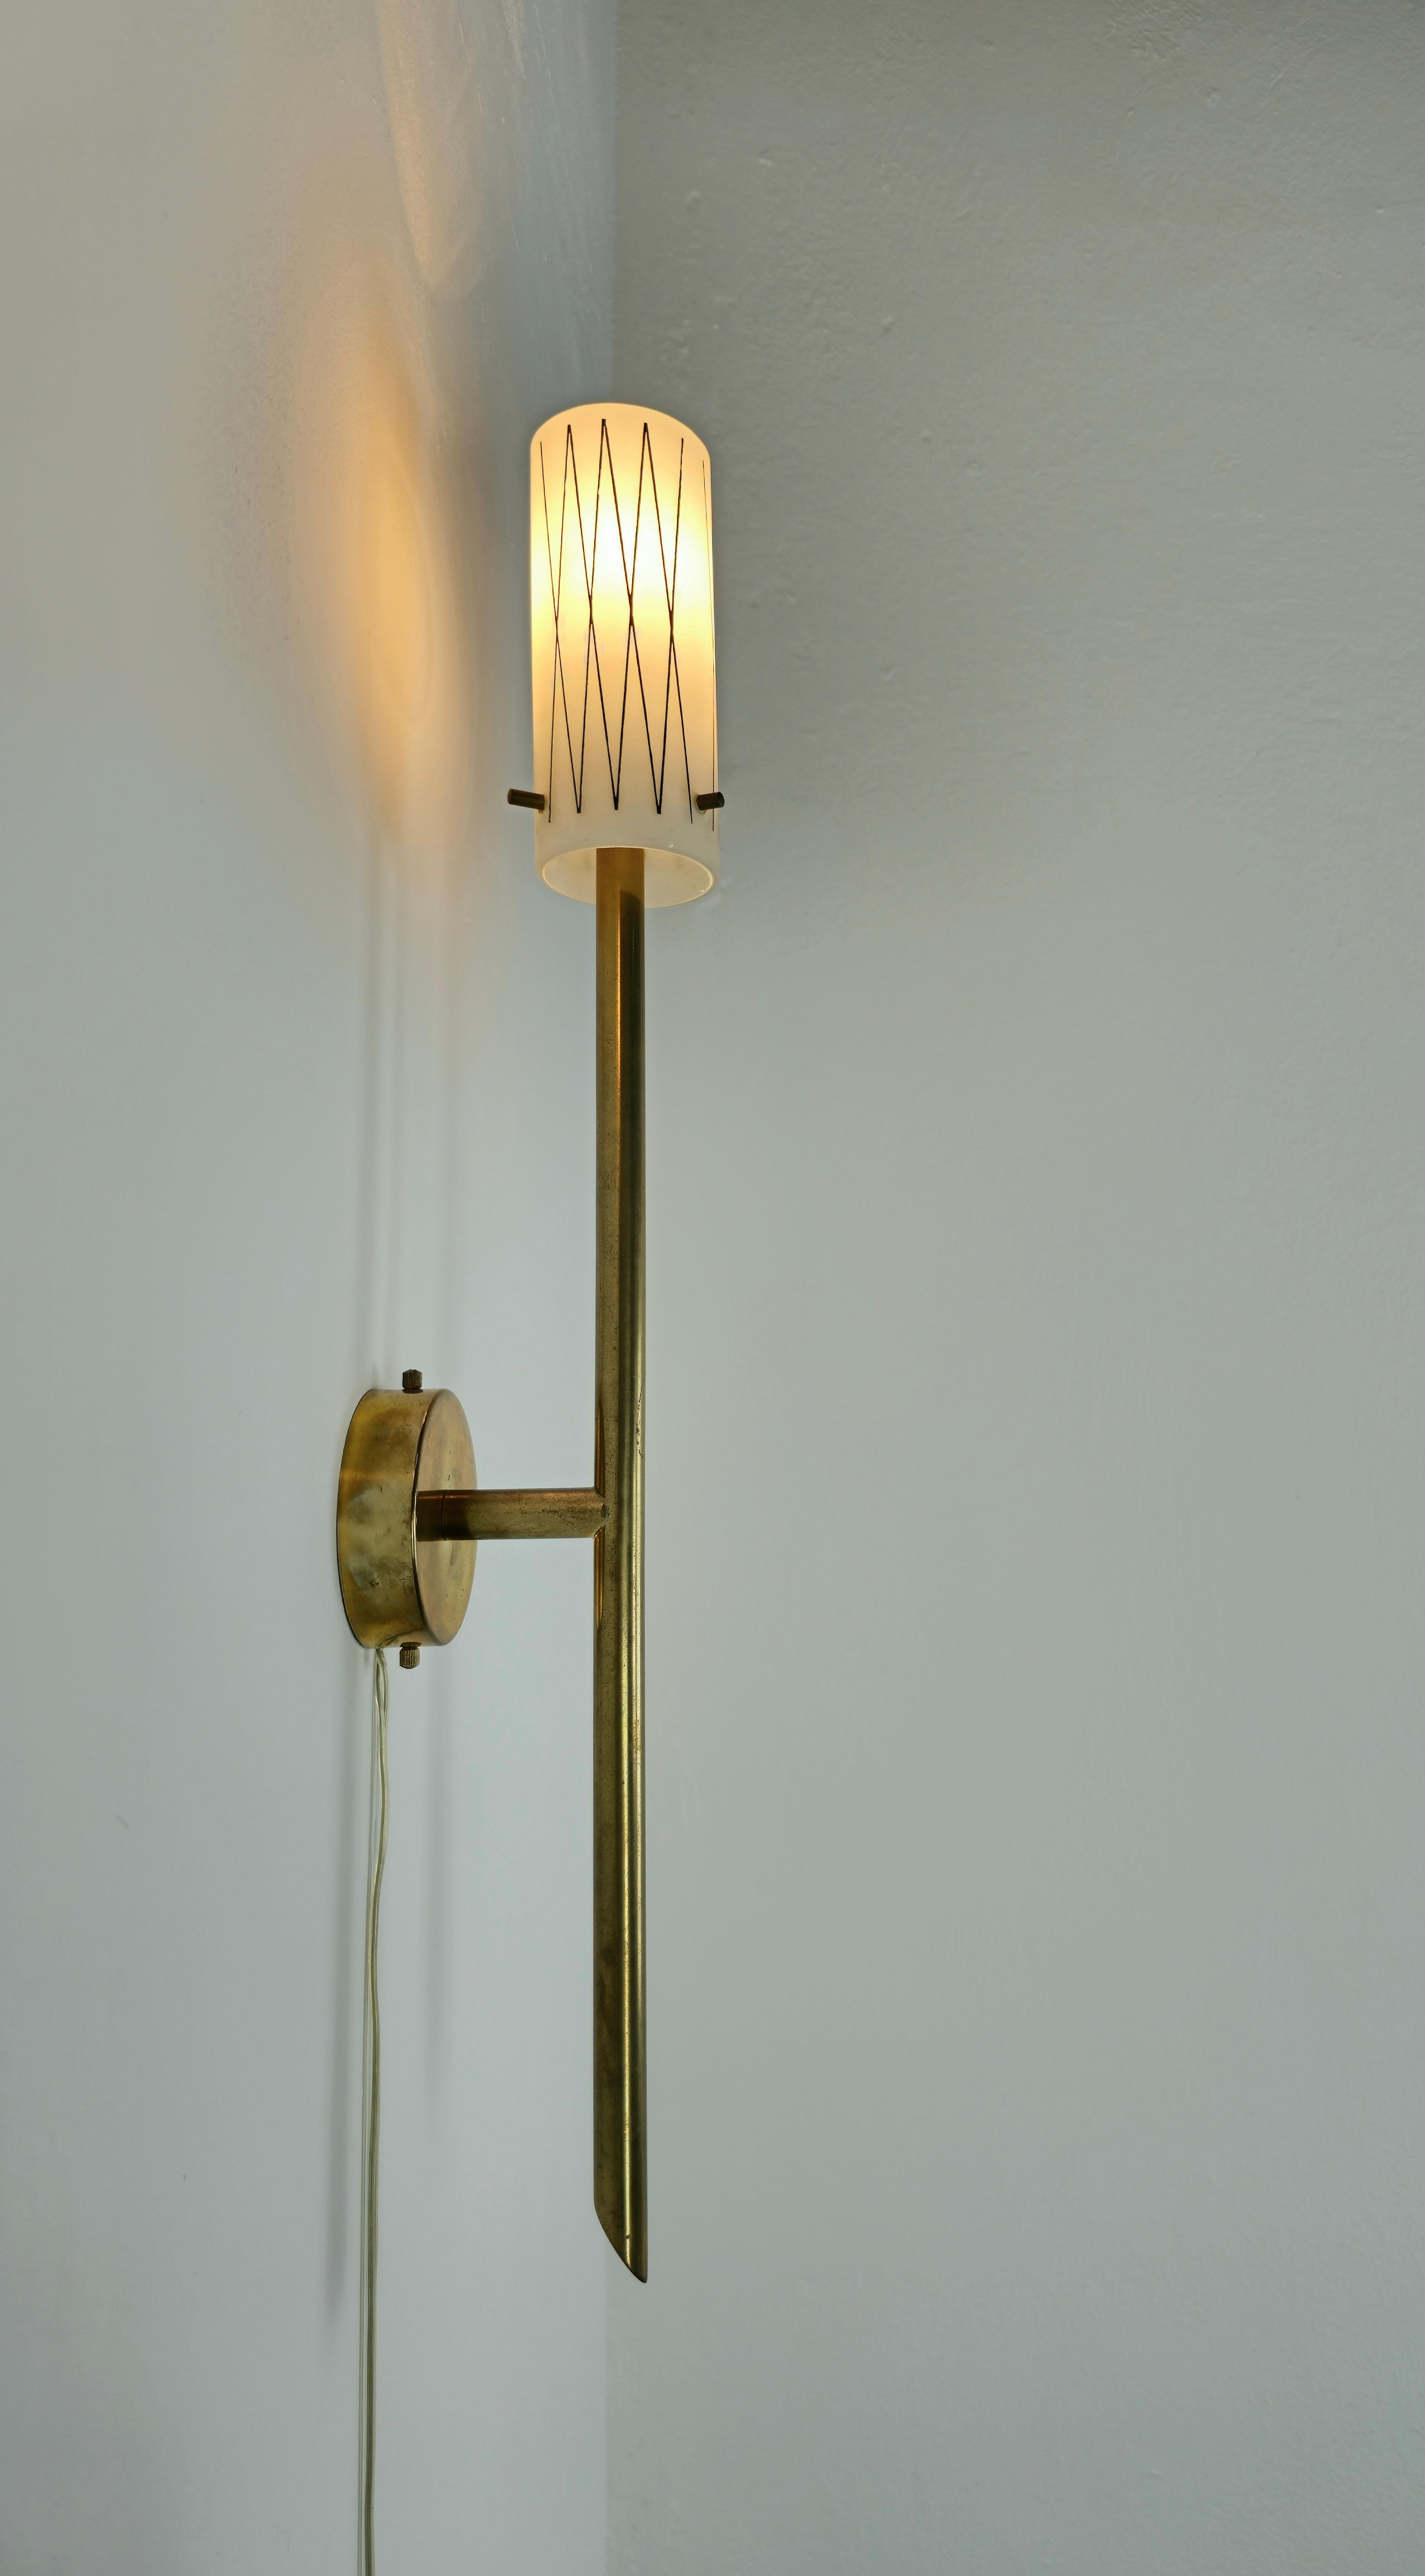 Pair of Wall Lights Sconces Brass Opaline Glass Midcentury Italian Design 1950s  For Sale 1